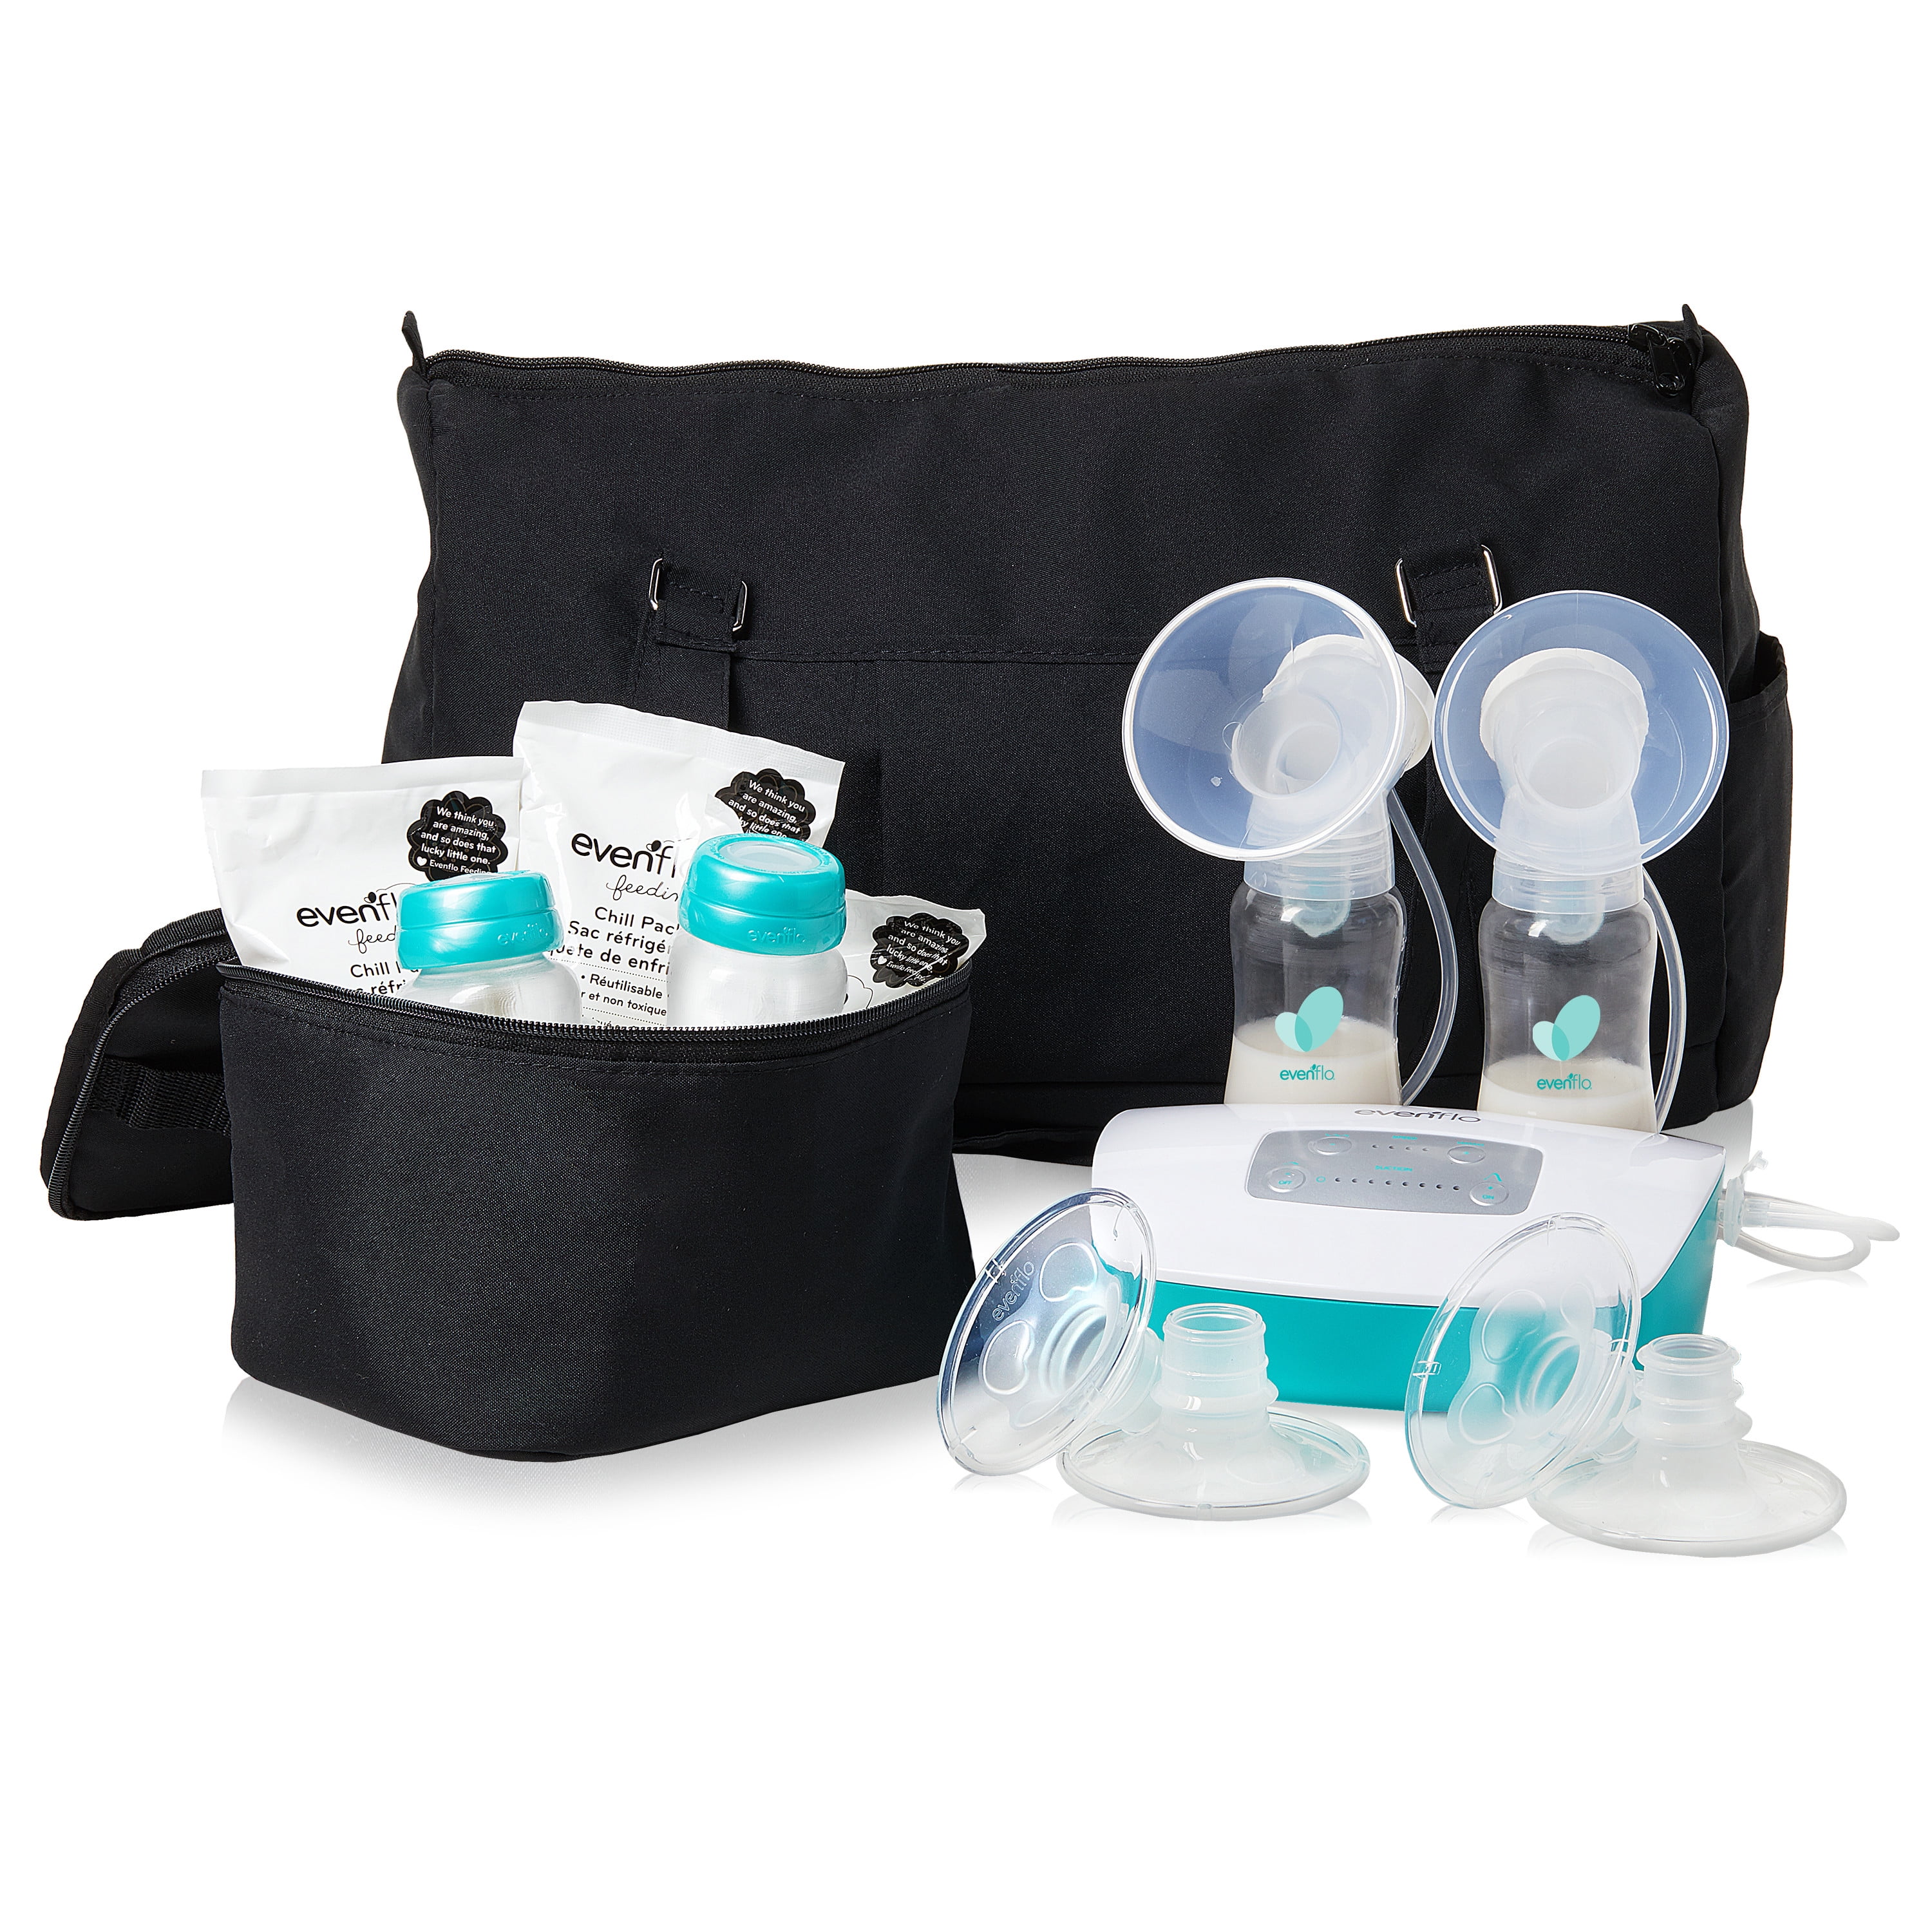 Evenflo Deluxe Advanced Double Electric Breast Pump w/Travel Bag & Cooler 937509 